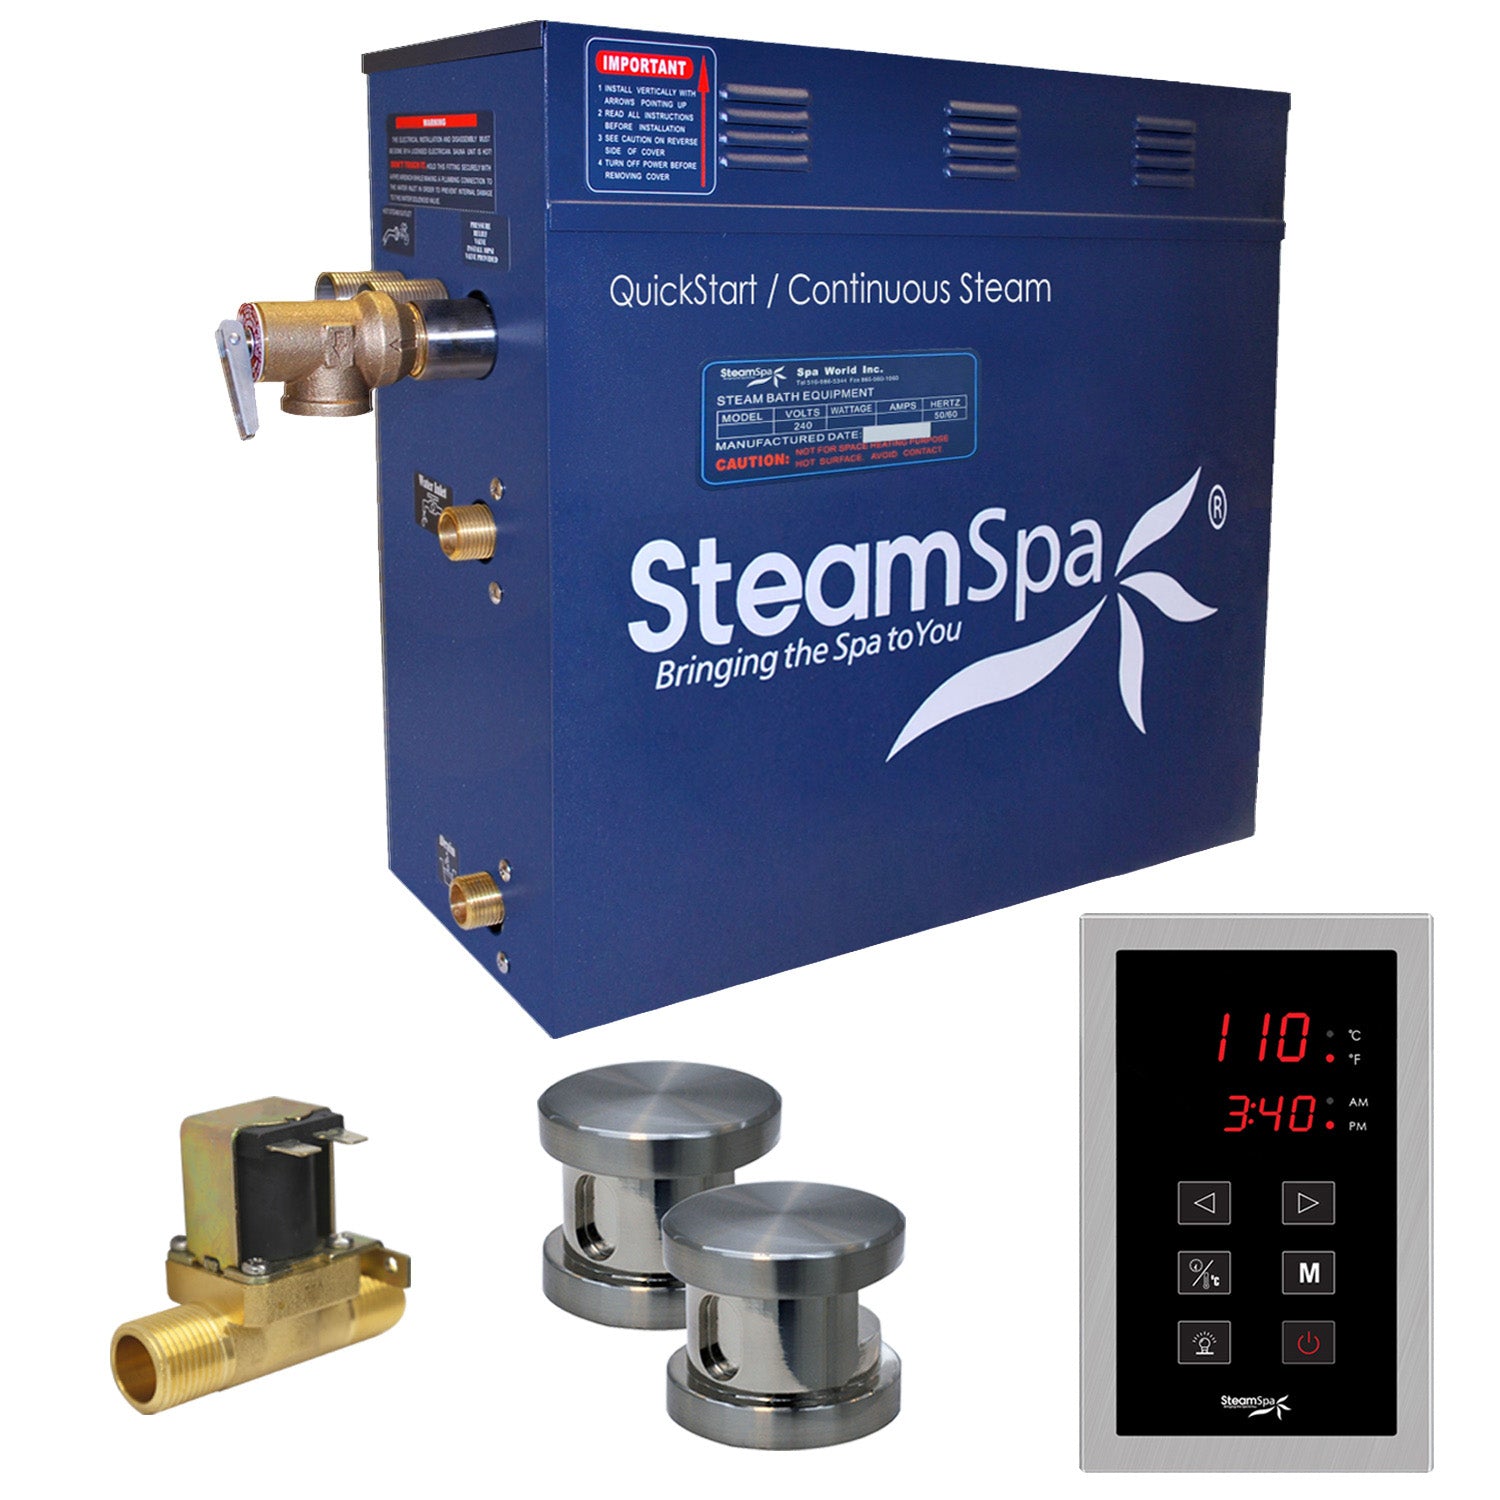 SteamSpa Oasis 10.5 KW QuickStart Acu-Steam Bath Generator Package - 9.5 in. L x 17 in. W x 15 in. - Stainless Steel - Brushed Nickel - Includes a 10.5kW QuickStart Acu-Steam Bath Generator, Touch Pad Control Panel, Two Steam heads, Pressure Relief Valve - OAT1050 - Vital Hydrotherapy